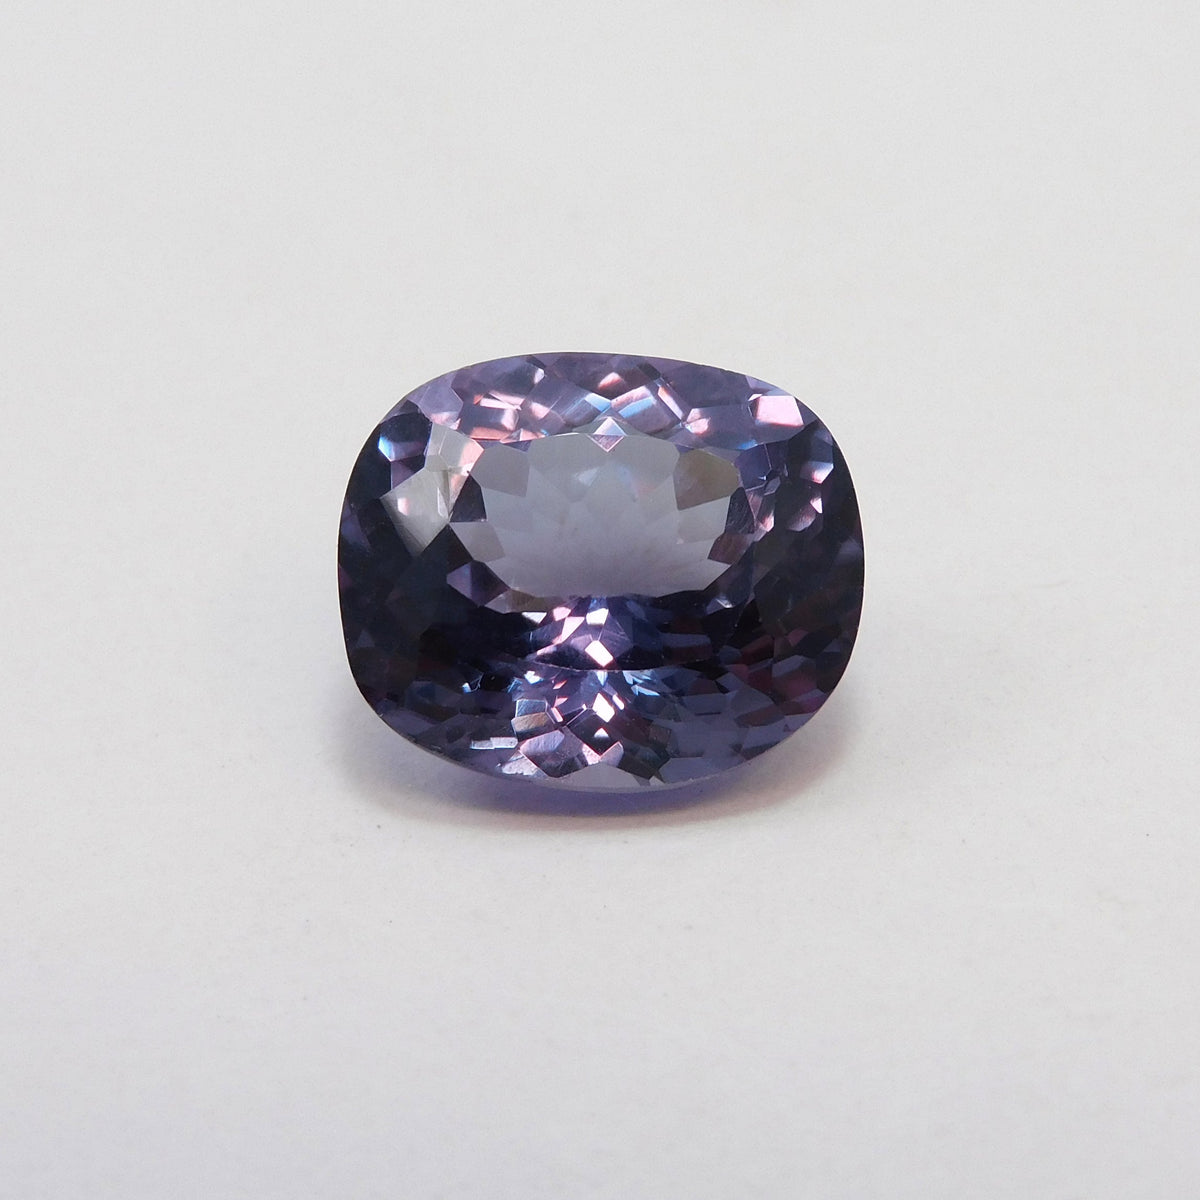 "ALEXNADRITE " Cushion Cut Natural Certified 10.00 Carat Color Change Loose Alexandrite Gemstone | Best For Protection & Good-Luck | Use As A Gift